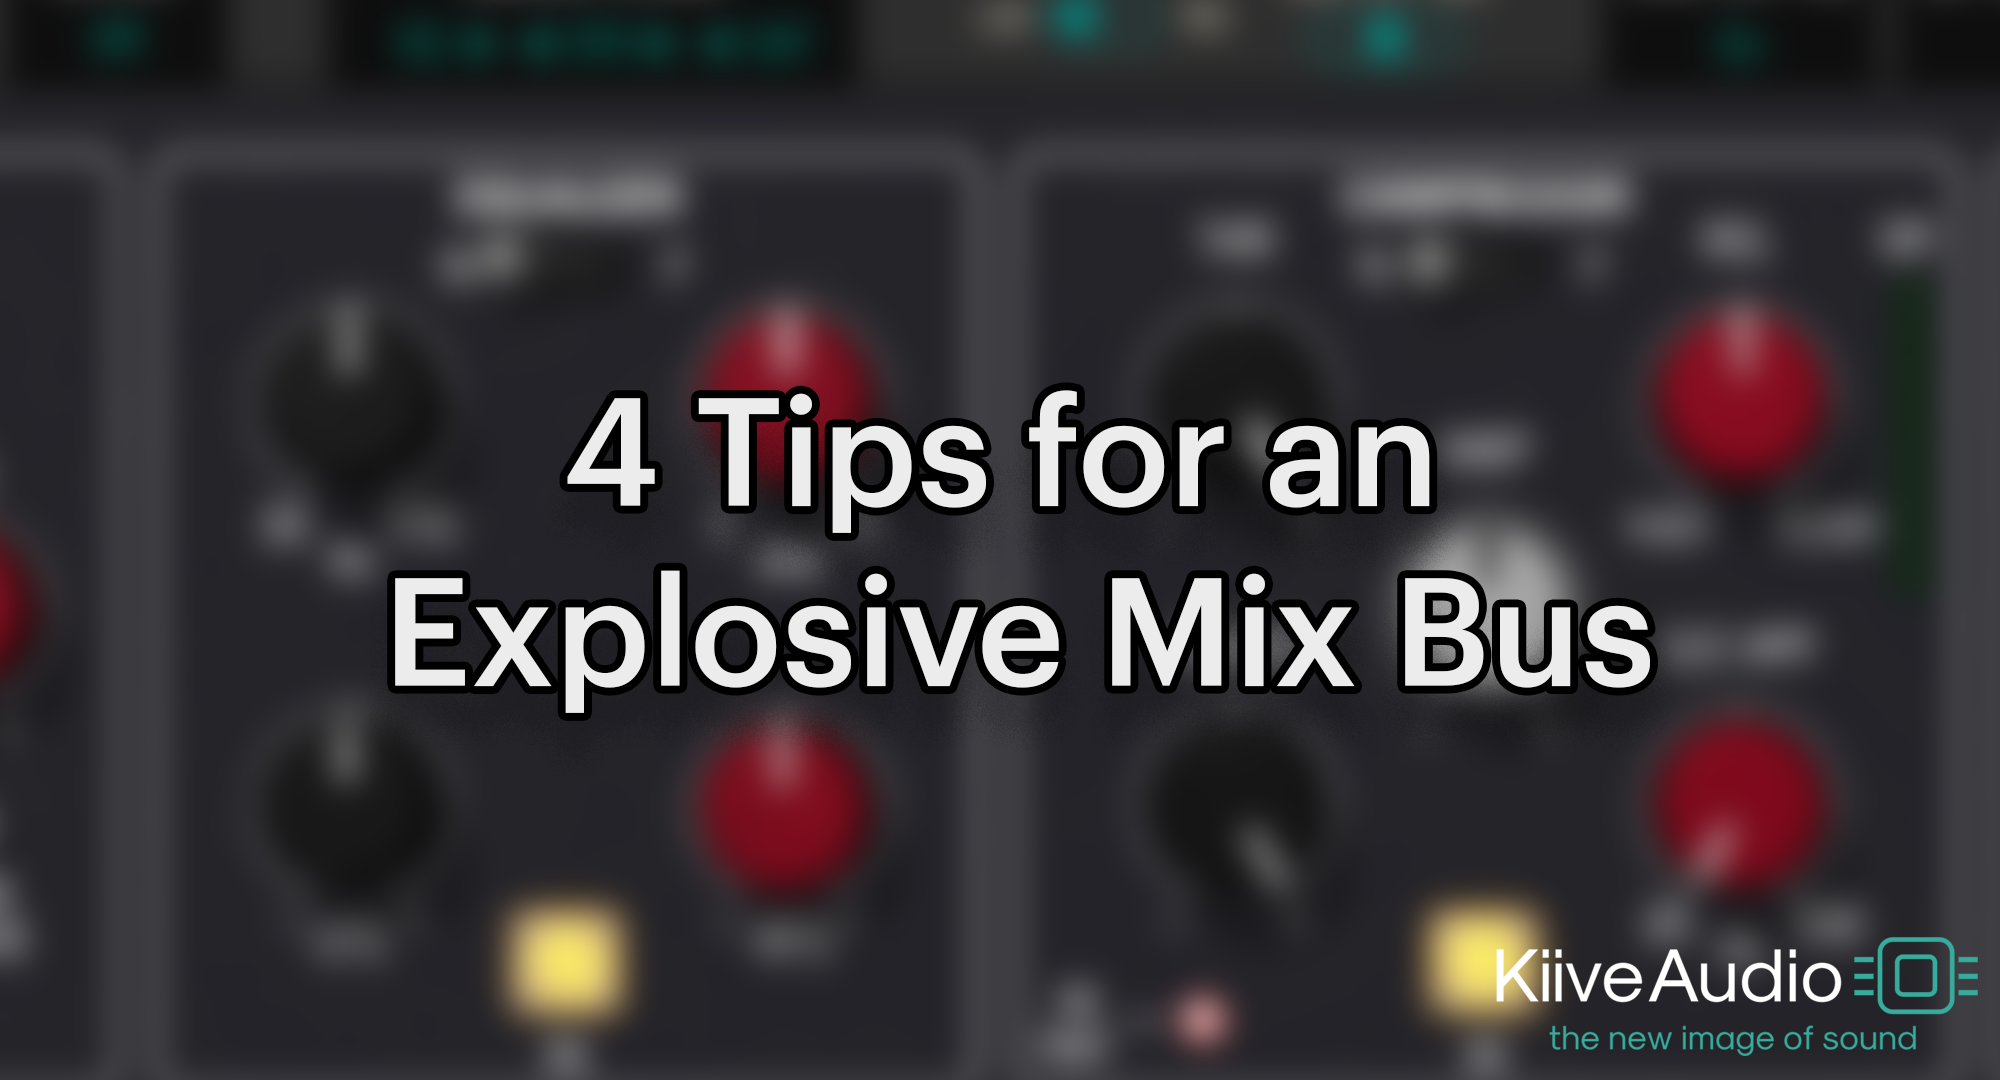 4 Tips for an Explosive Mix Bus